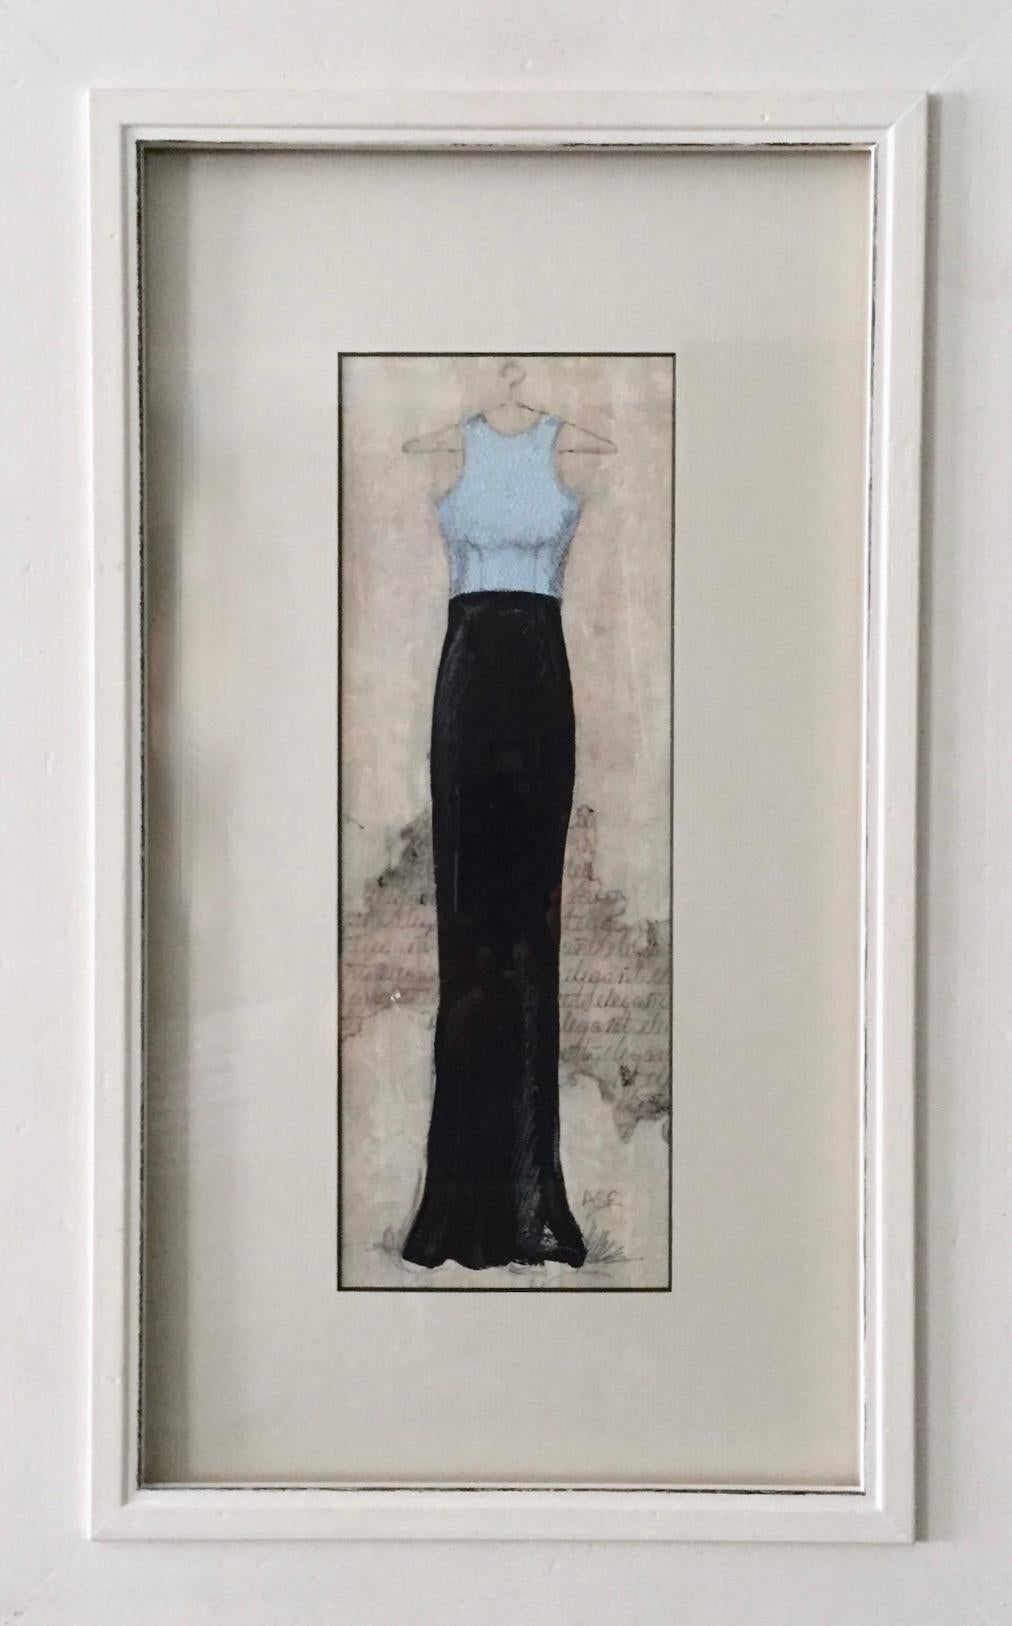 This dress painting on board communicates the essence of classic style. A tone on tone background builds up texture along with a scripted pencil pattern adding interest to the overall composition. The combination of delicate detail and intuitive